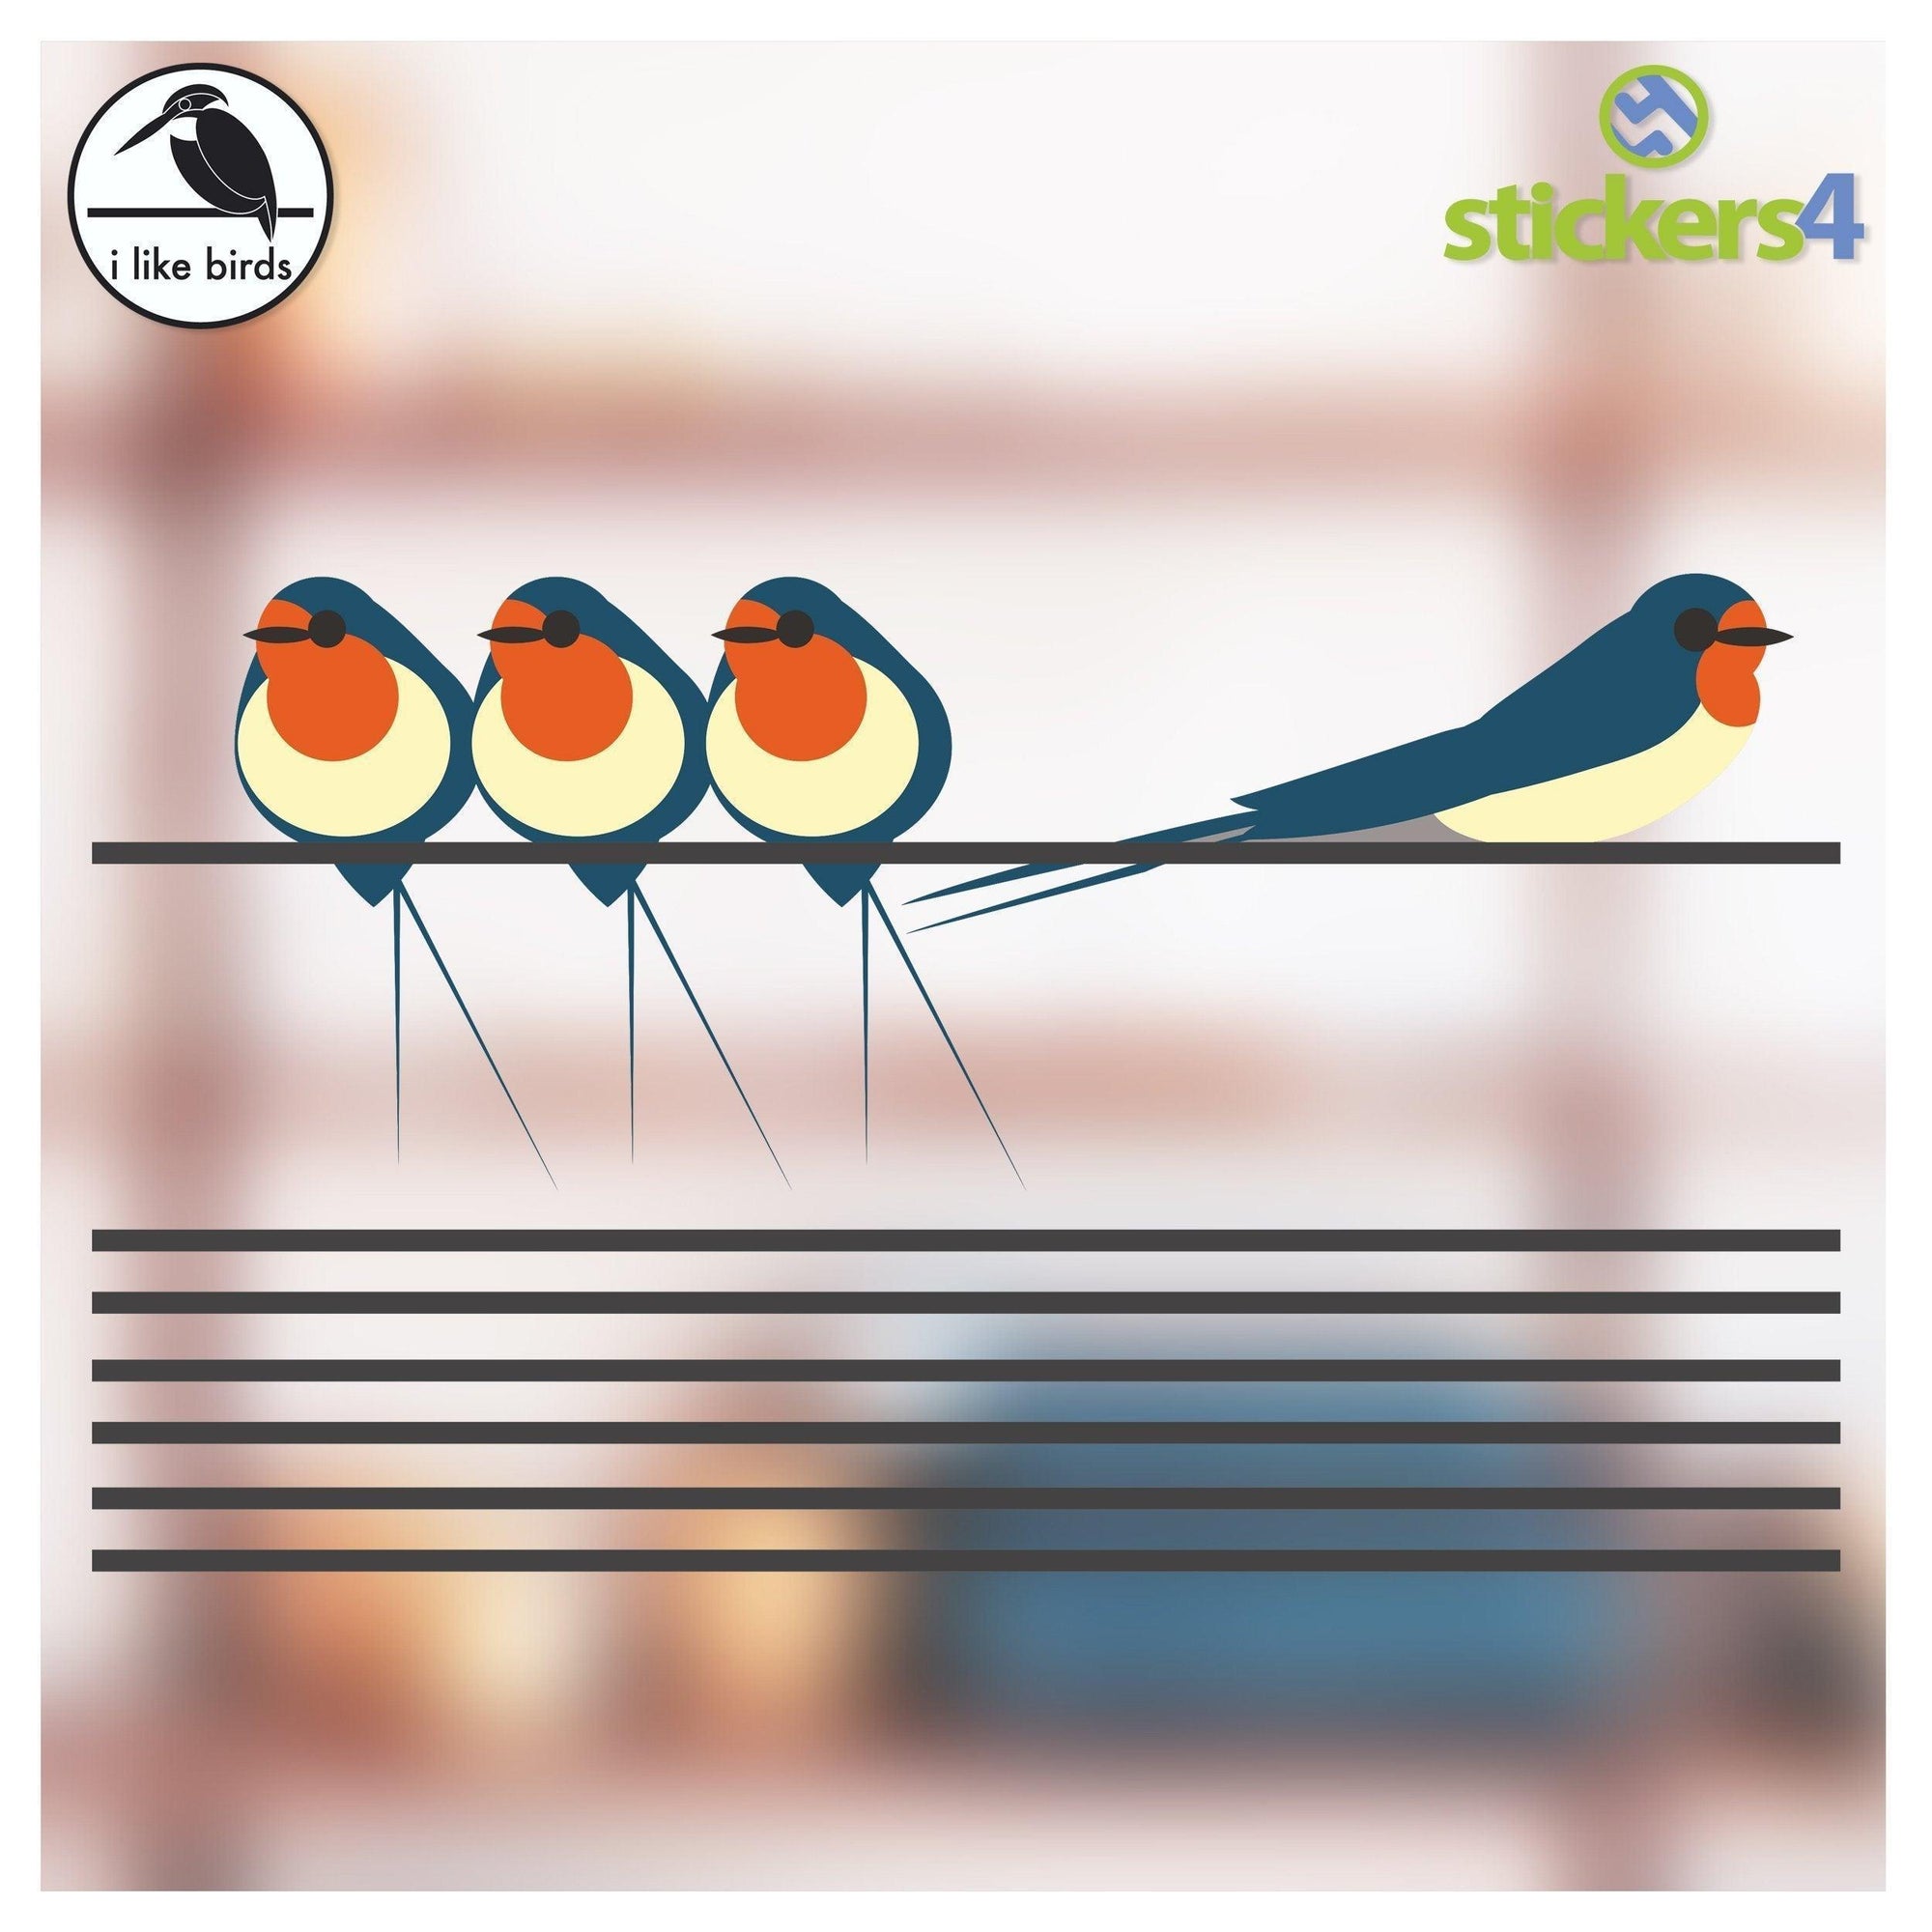 Swallows on a Wire - set of static cling window stickers Decorative Bird Strike Prevention